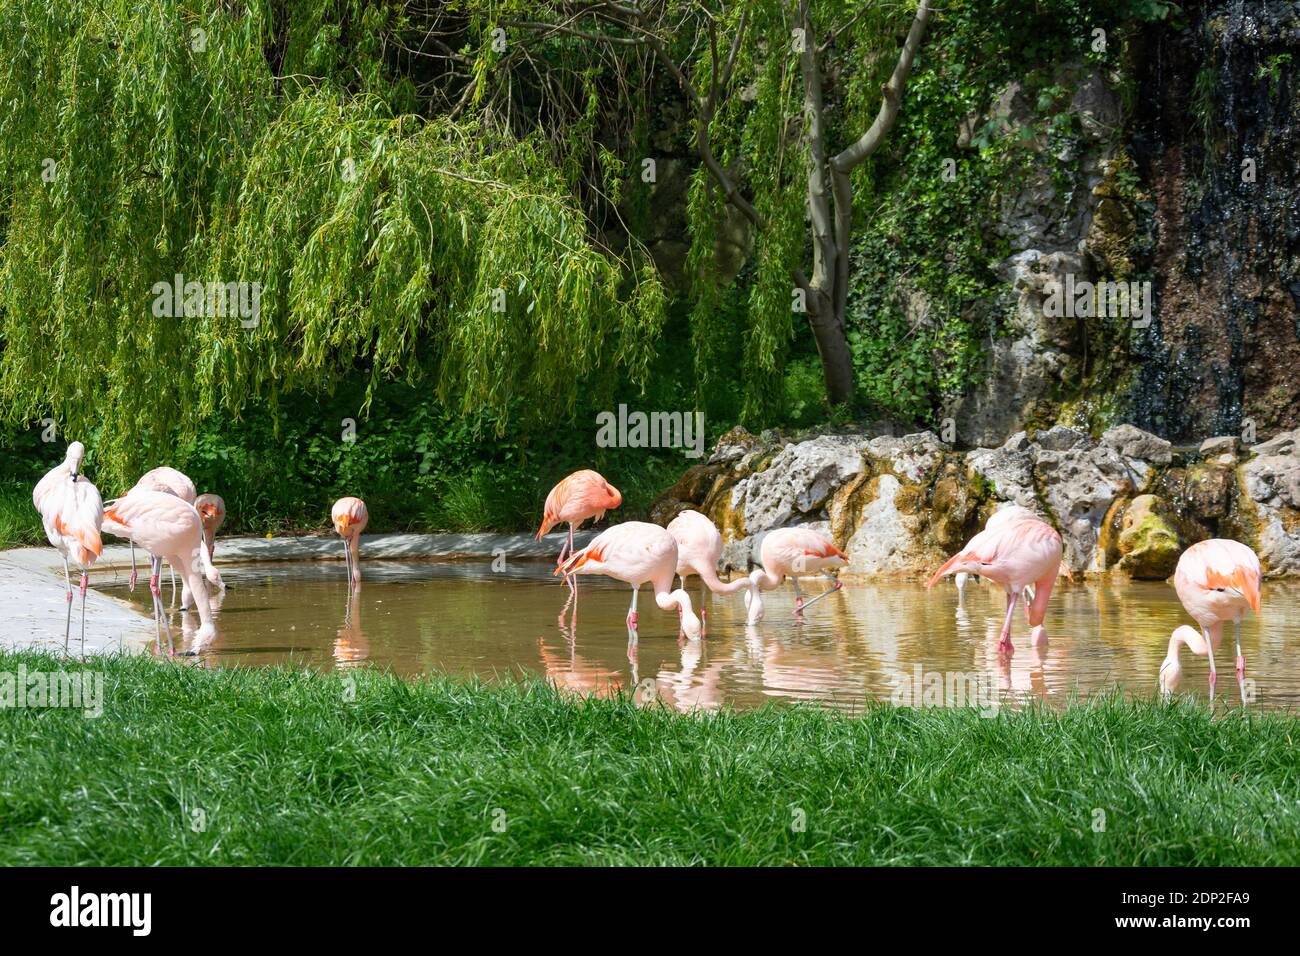 Pink flamingos in pool at Dudley Zoological Gardens, Castle Hill, Dudley, West Midlands, England, United Kingdom Stock Photo